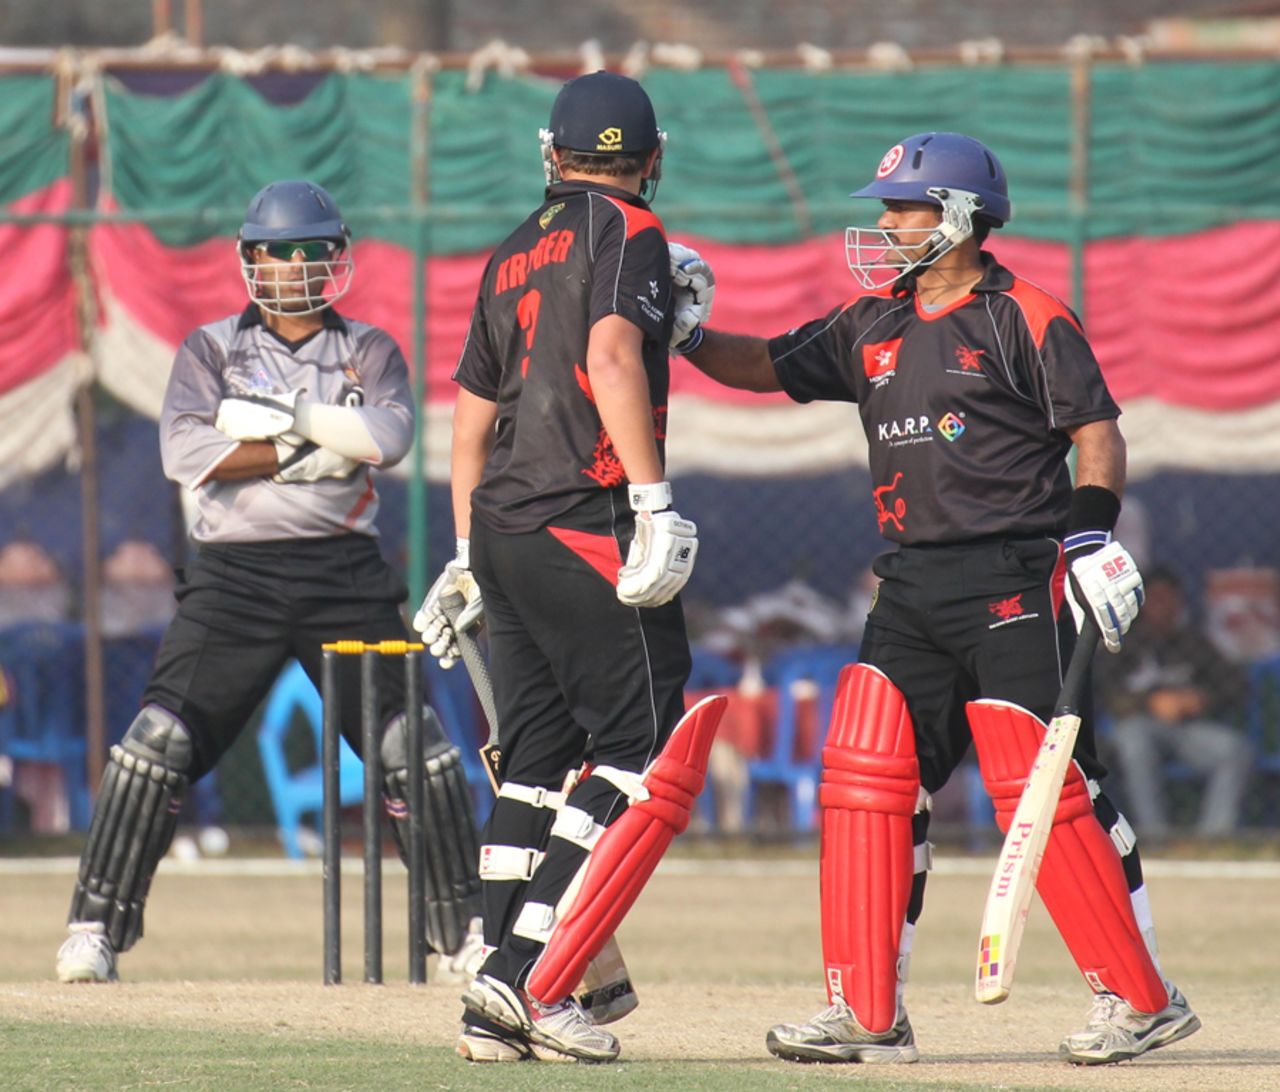 Moner Ahmed intervenes after Courtney Kruger and UAE's Abdul Rehman exchange a few pleasantries at the ACC Twenty20 Cup 2011 played on Kathmandu on 6th December 2011